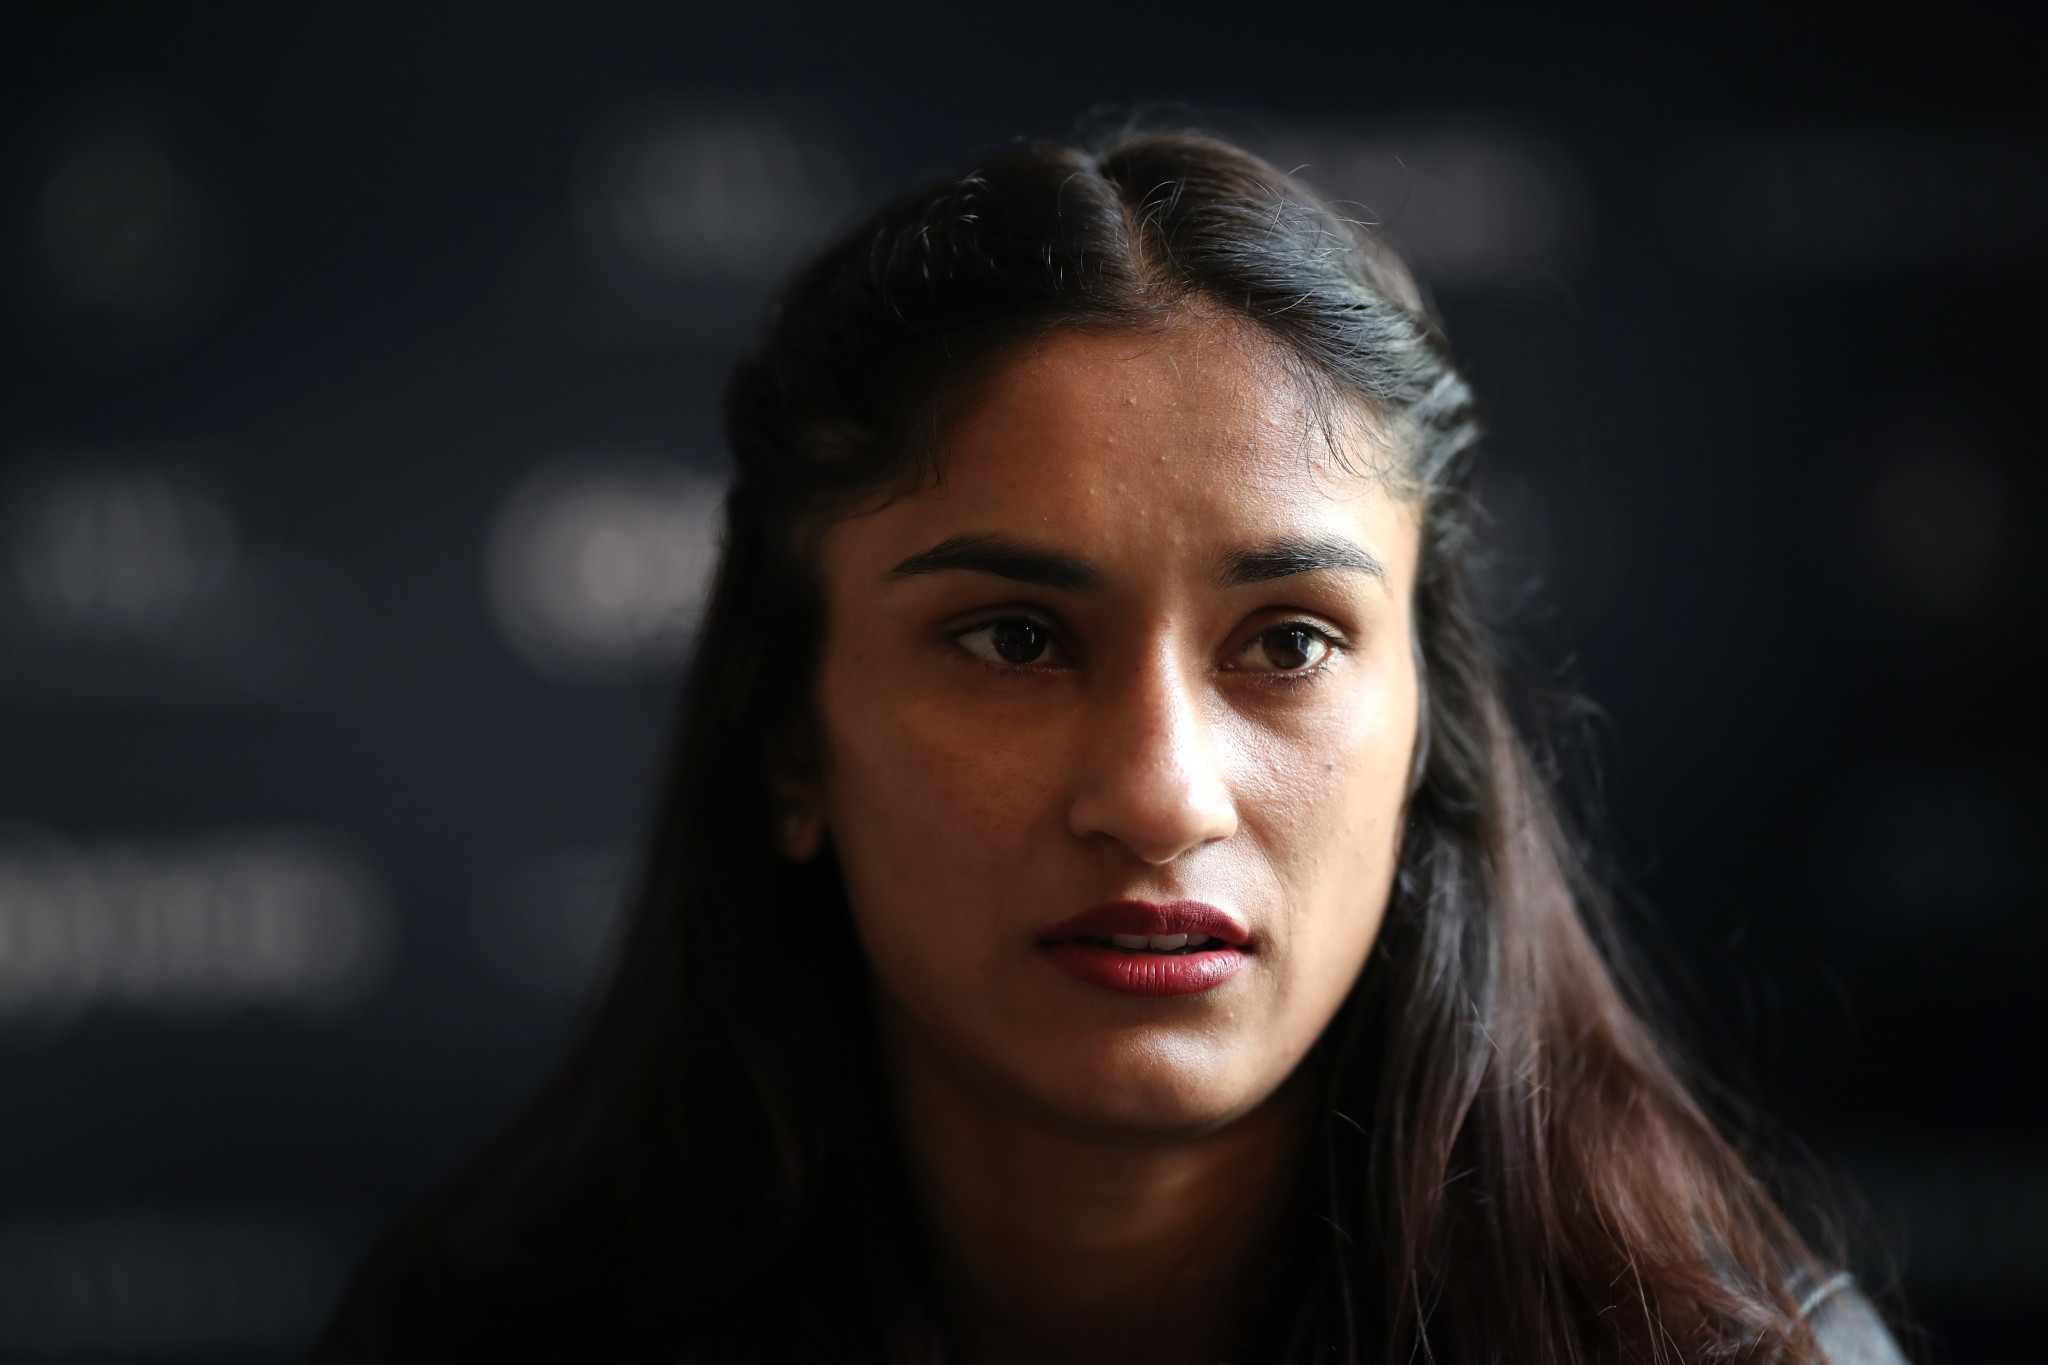 Vinesh Phogat is considering legal action against the Wrestling Federation of India ©Getty Images